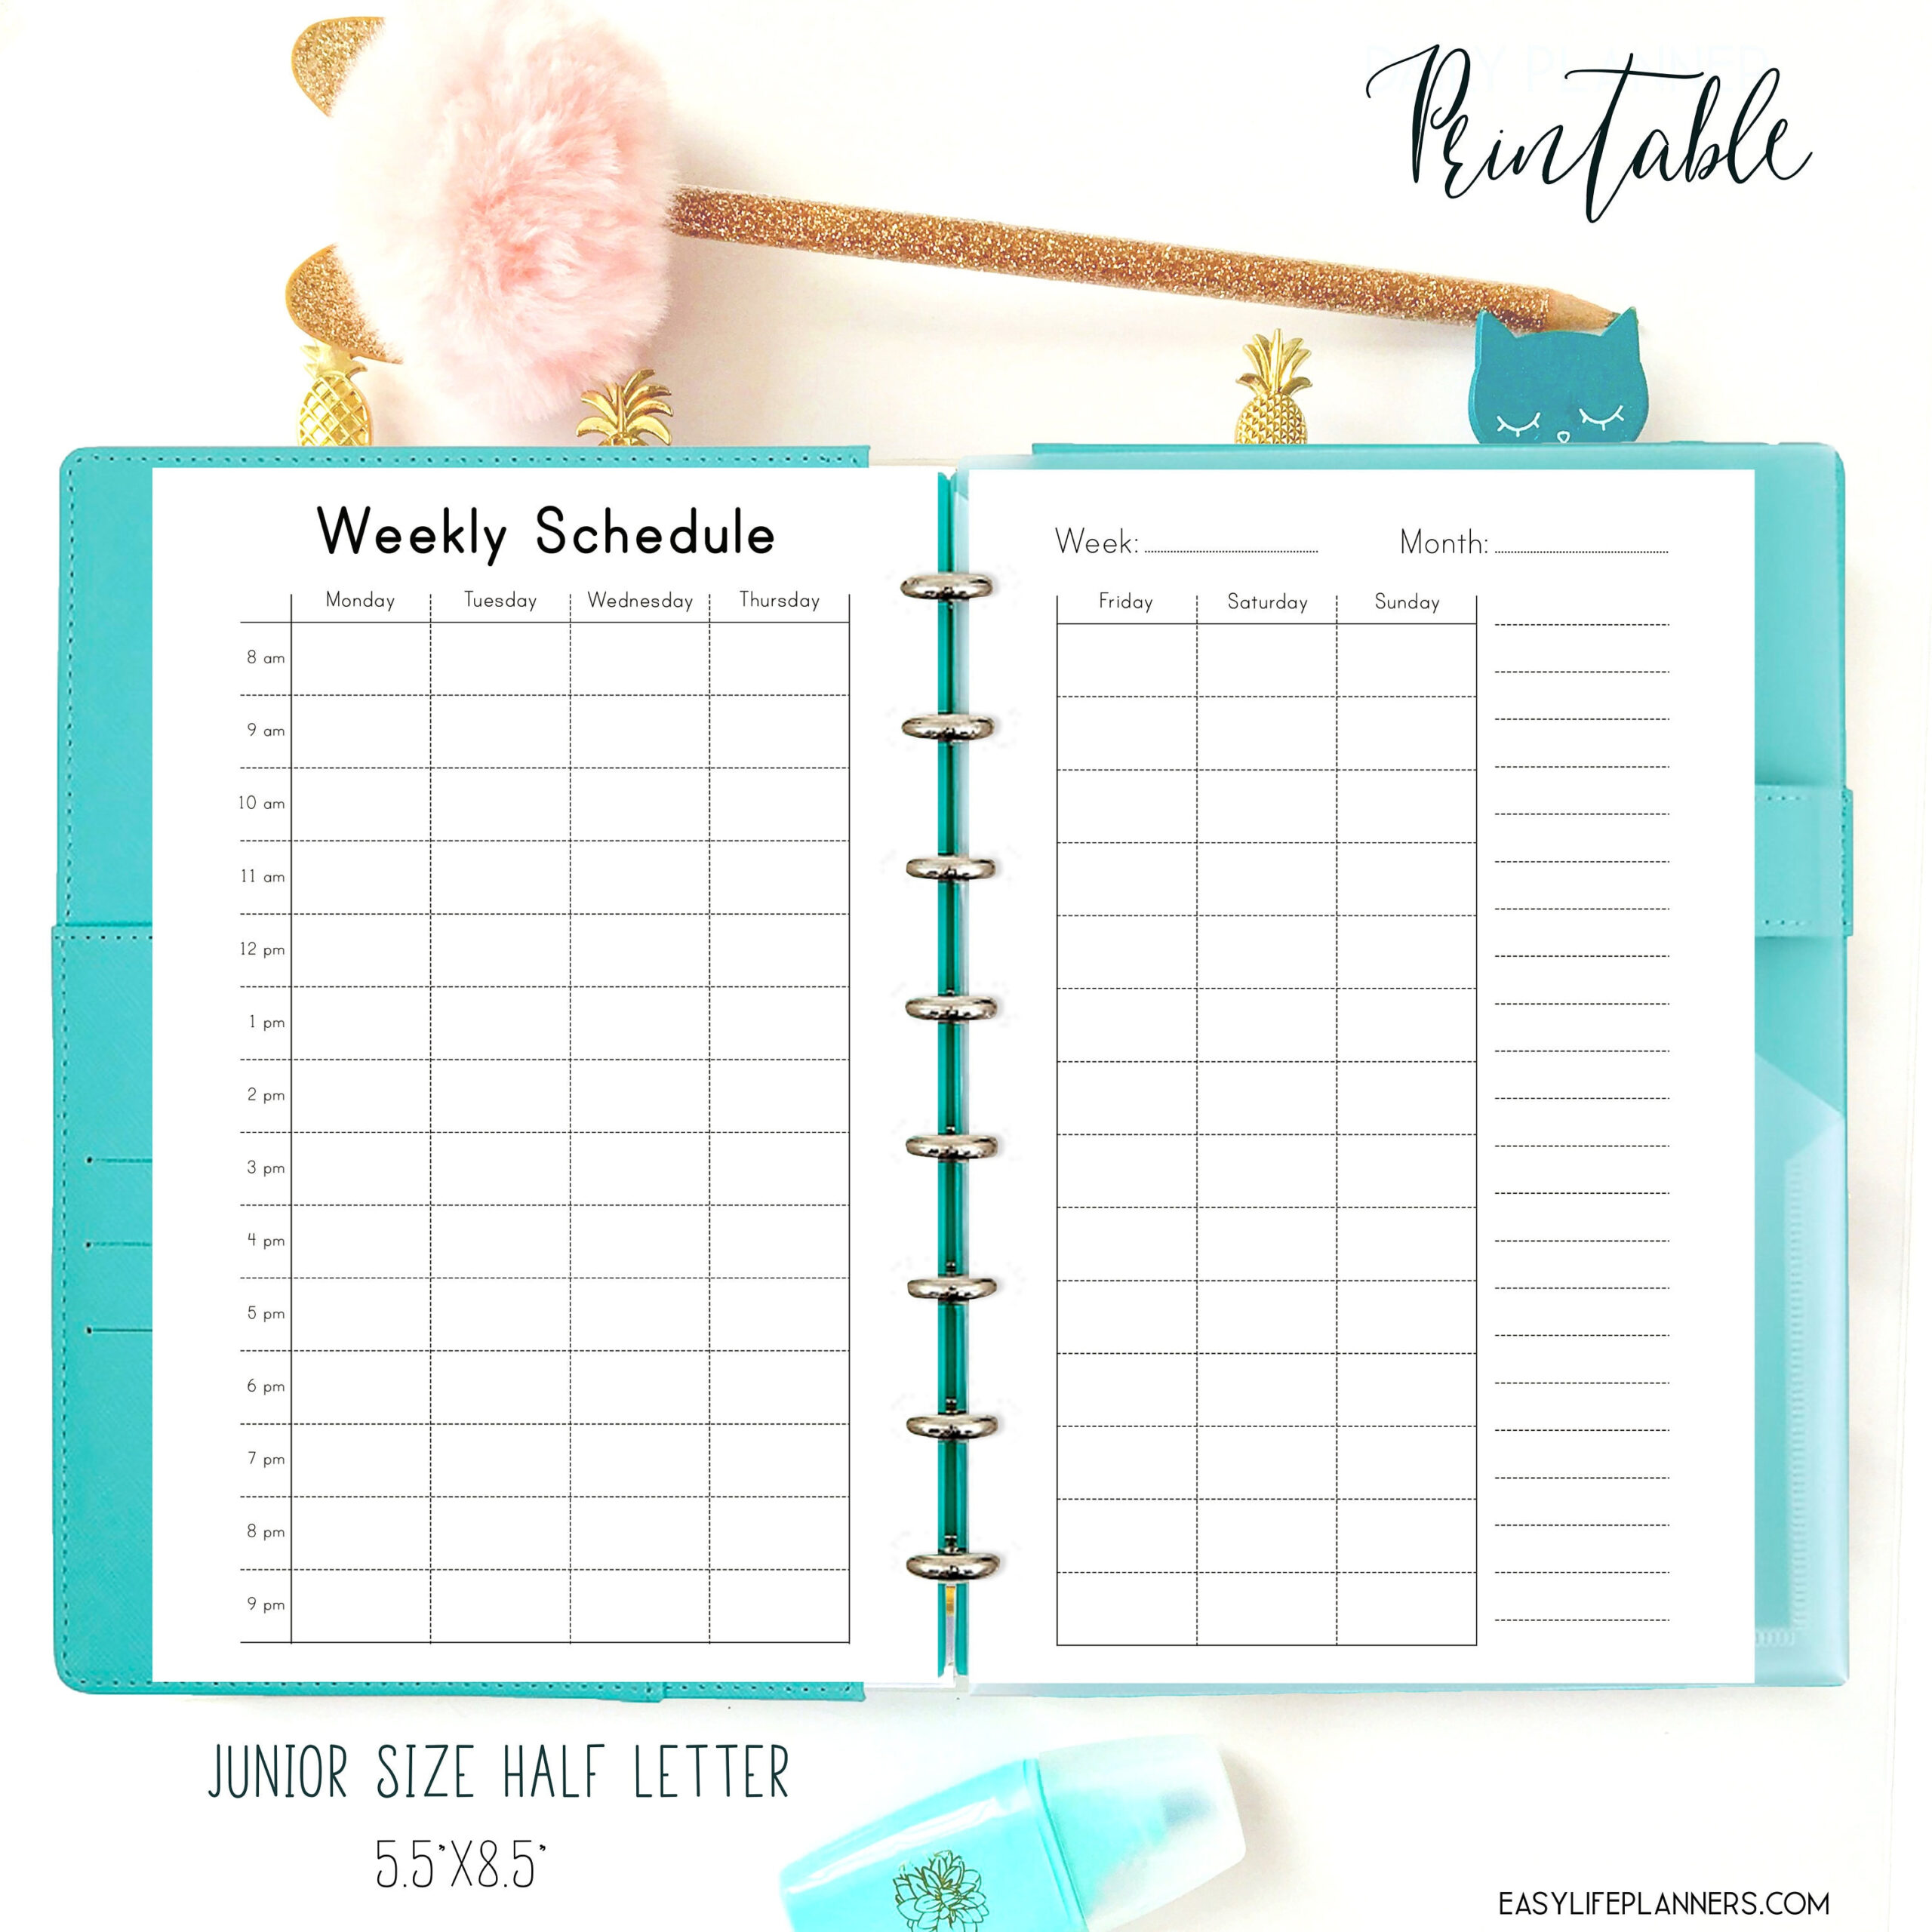 Weekly Hourly Planner Half Letter Size Weekly Schedule 